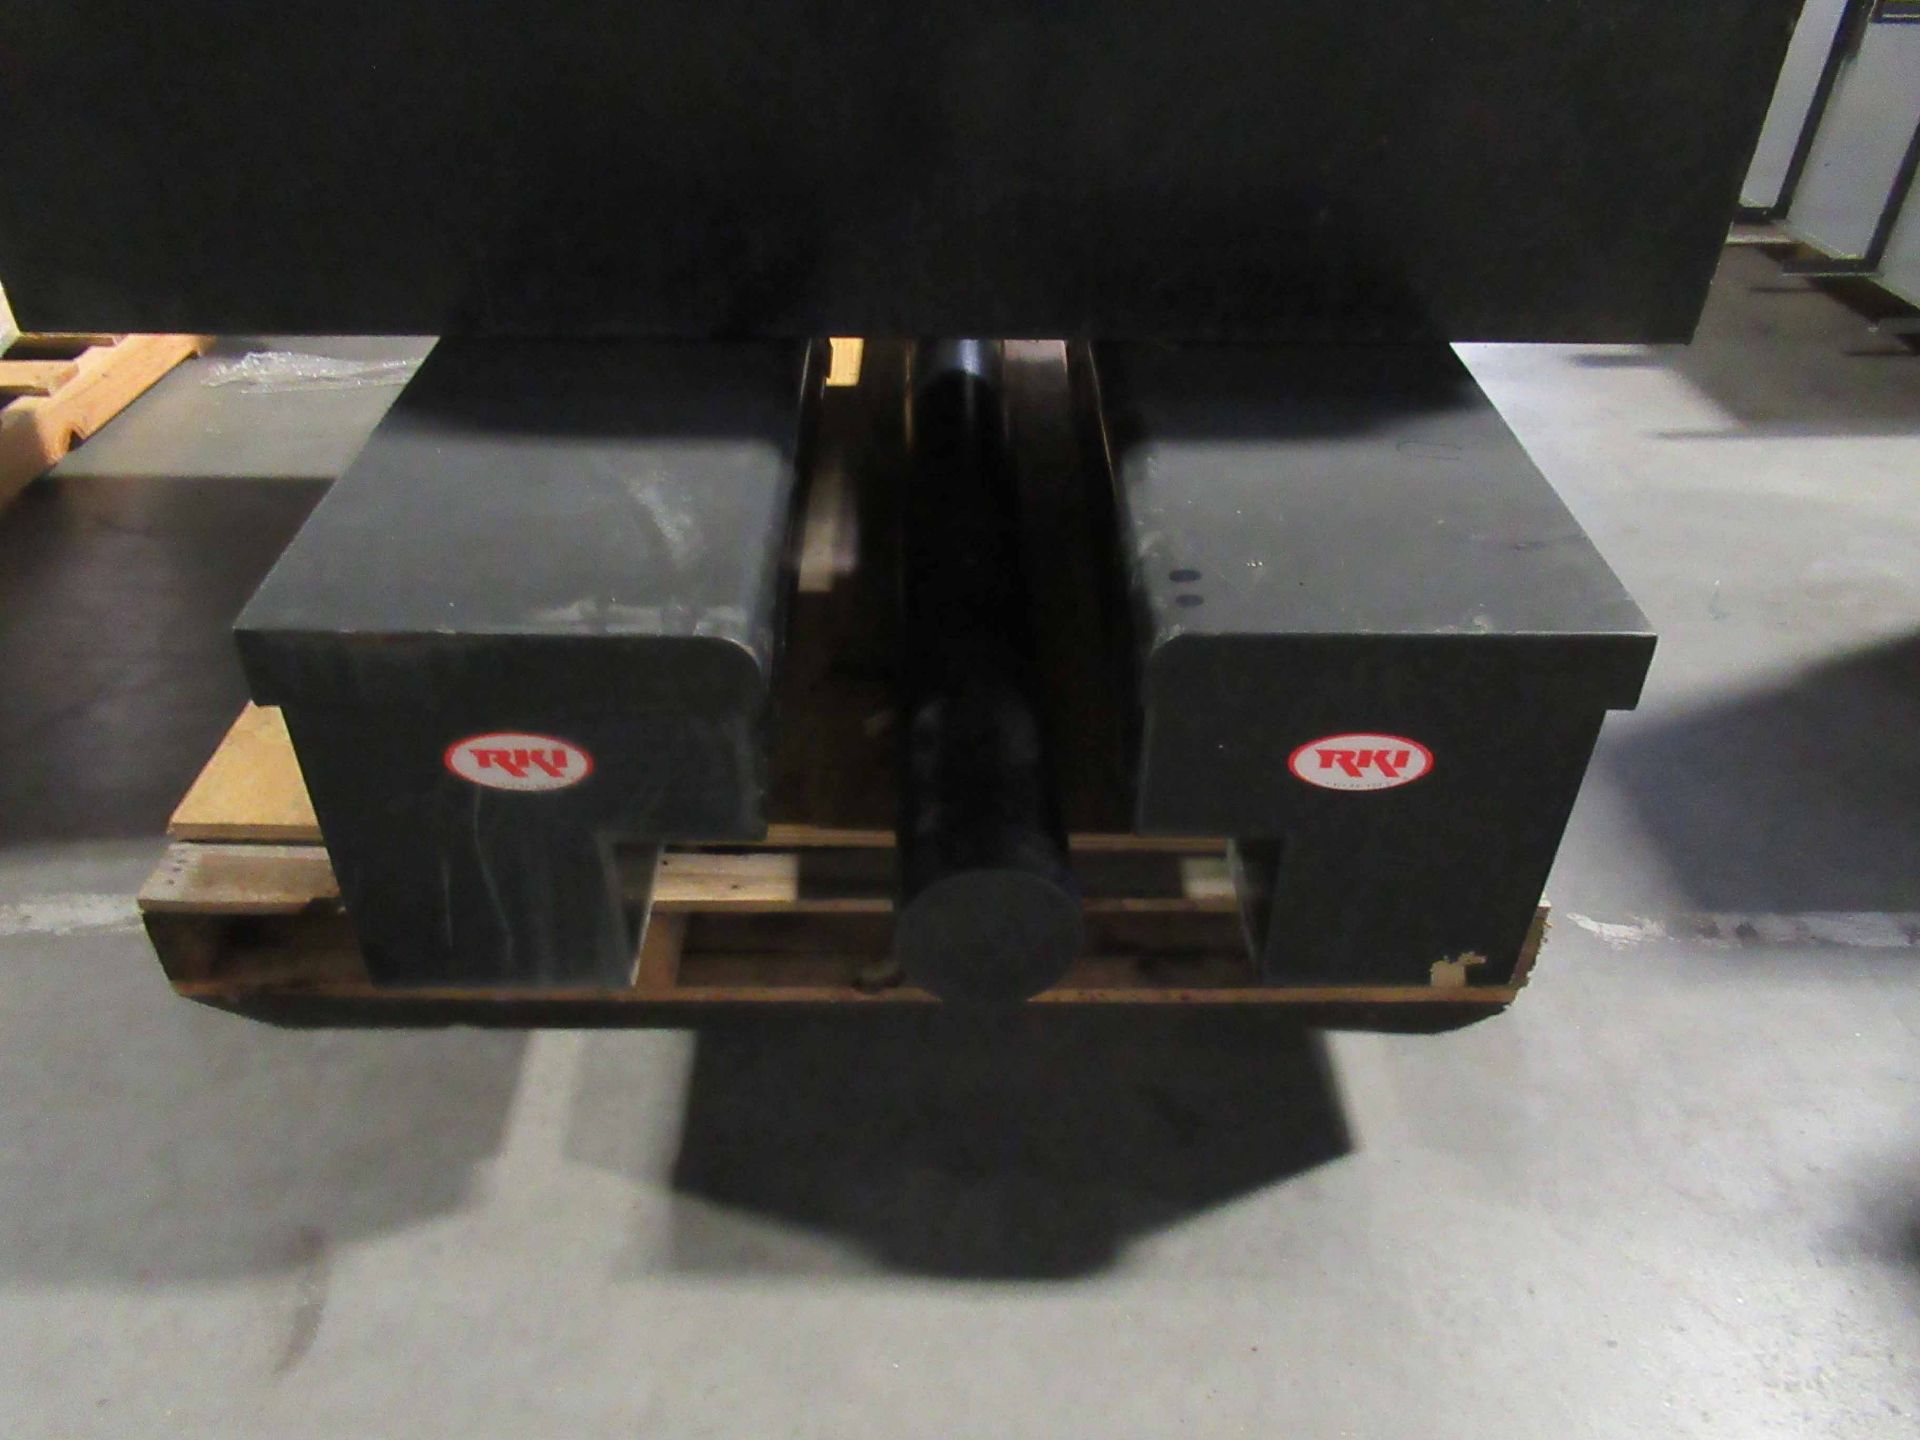 LOT CONSISTING OF: (4) COMMERCIAL GRADE TOOLBOXES, RKI, 71.25" overall length; PORTABLE TOOLBOX, - Image 3 of 6